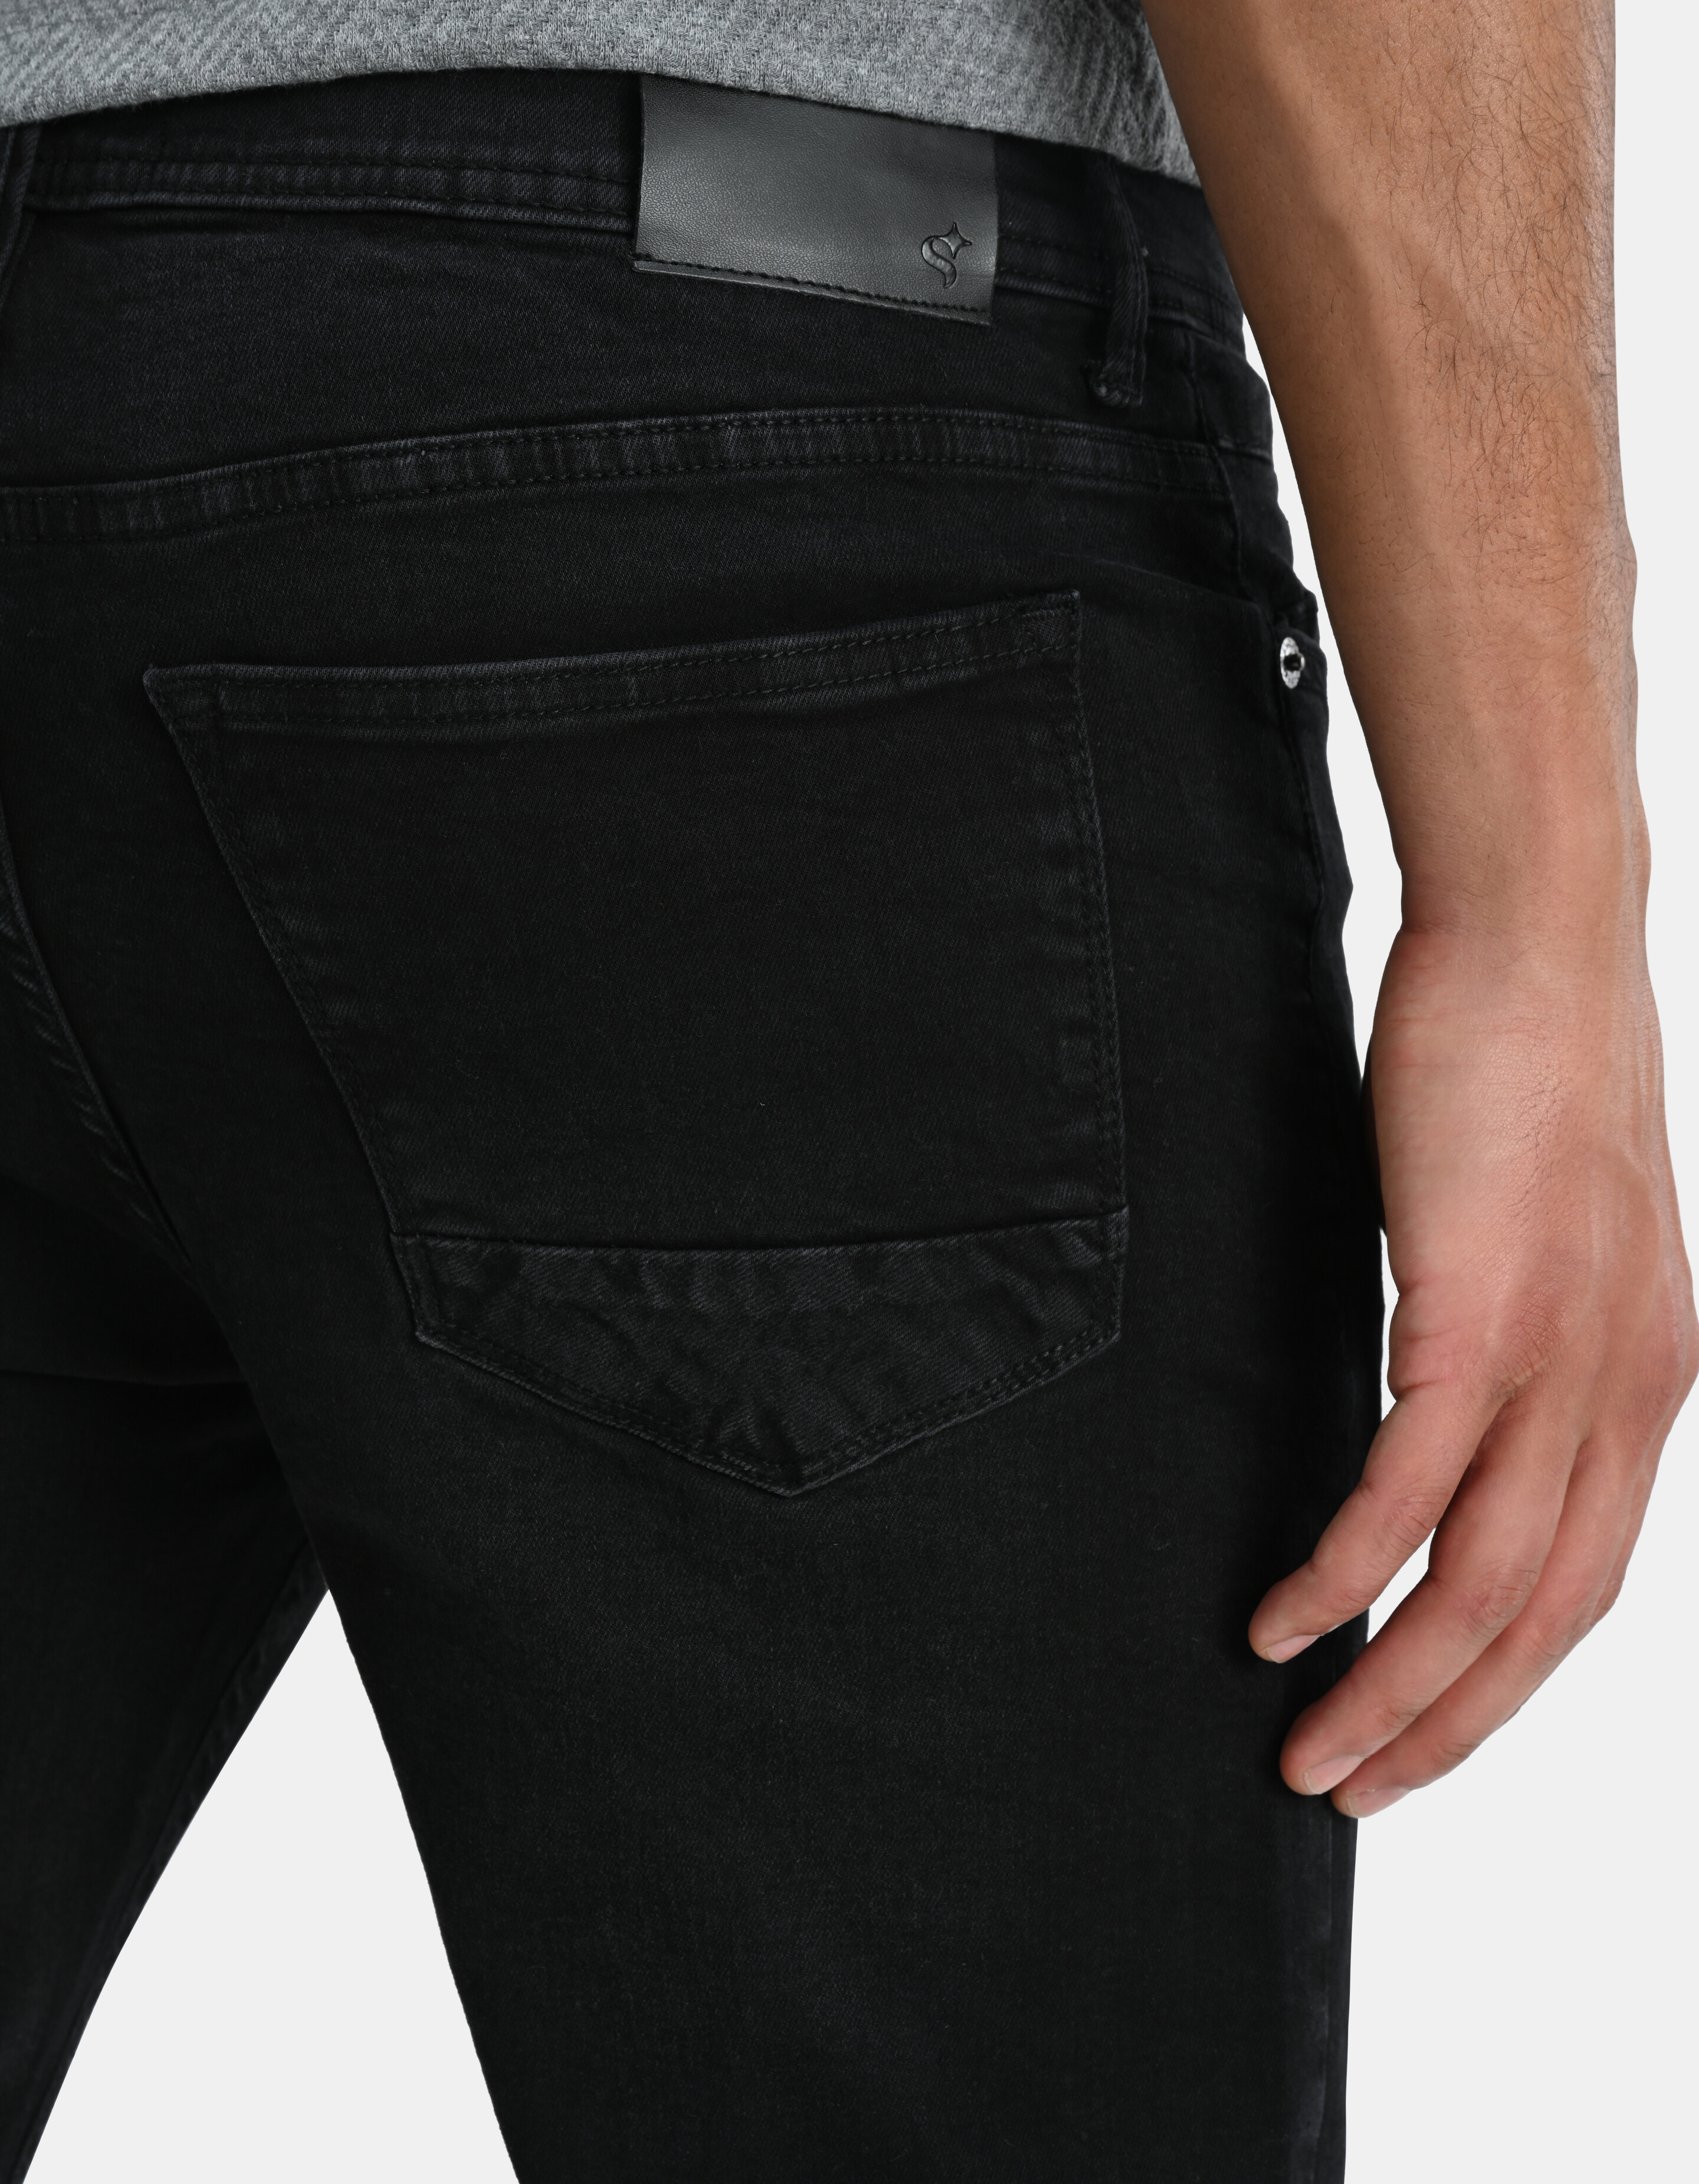 Straight Jeans Washed Black L34 Refill